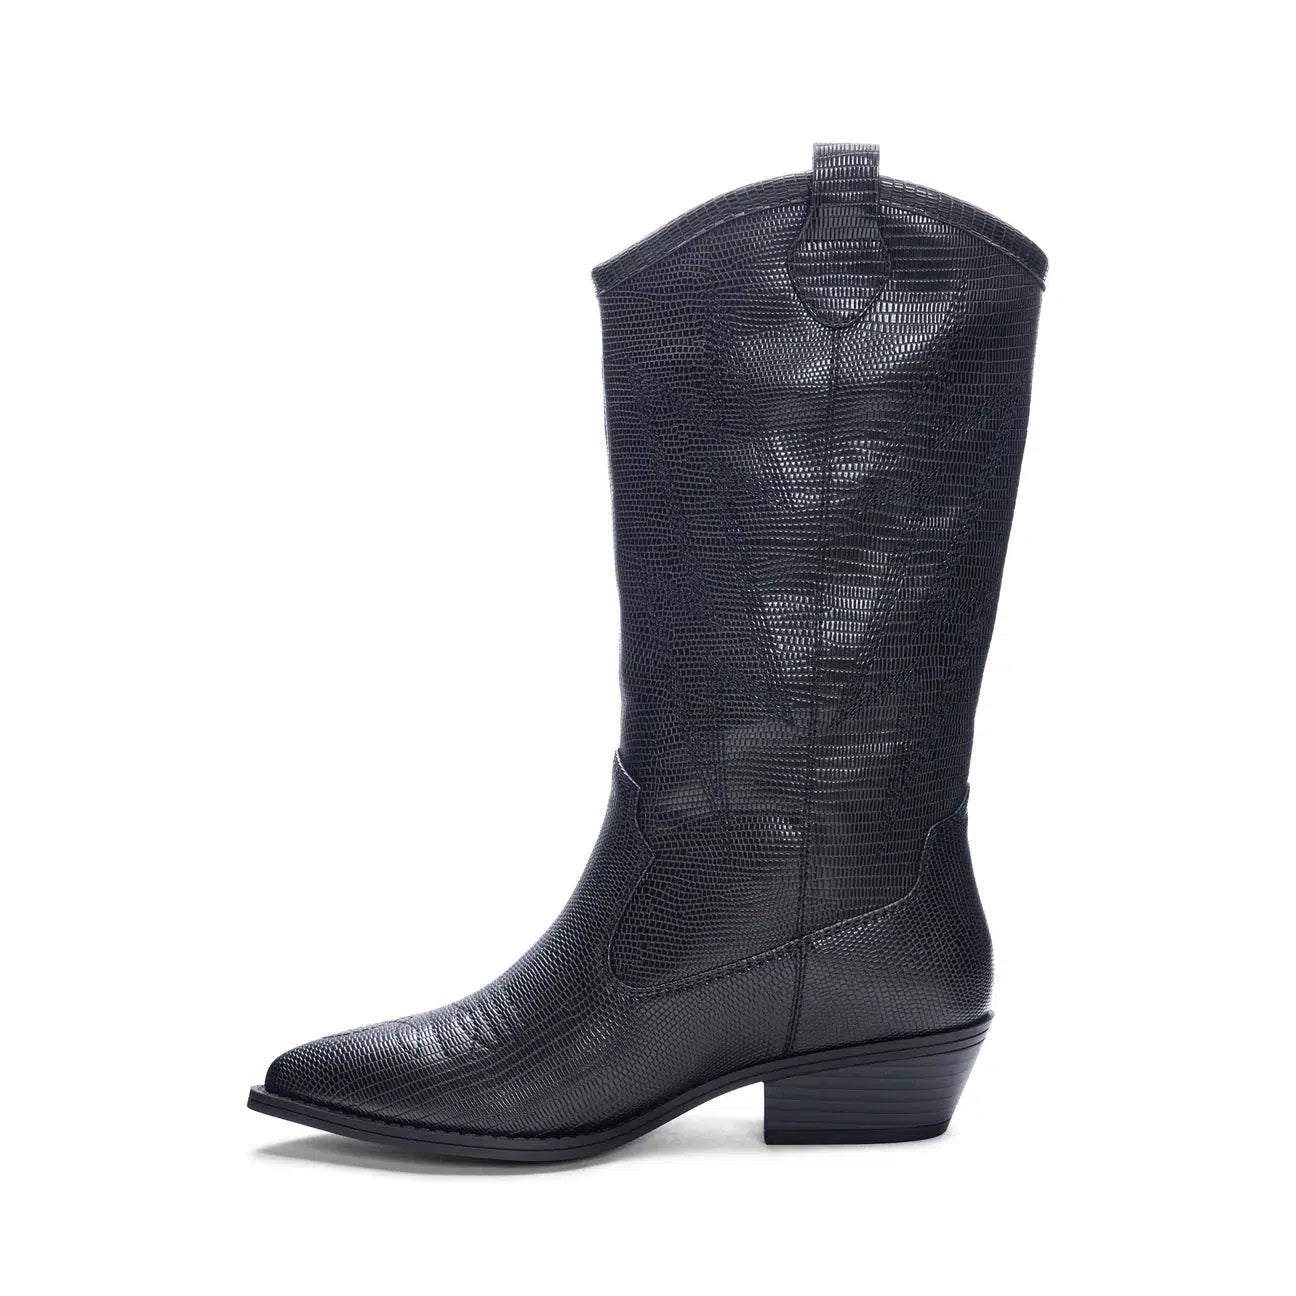 JOSEA WESTERN BOOT-LADIES BOOTS-CHINESE LAUNDRY-JB Evans Fashions & Footwear